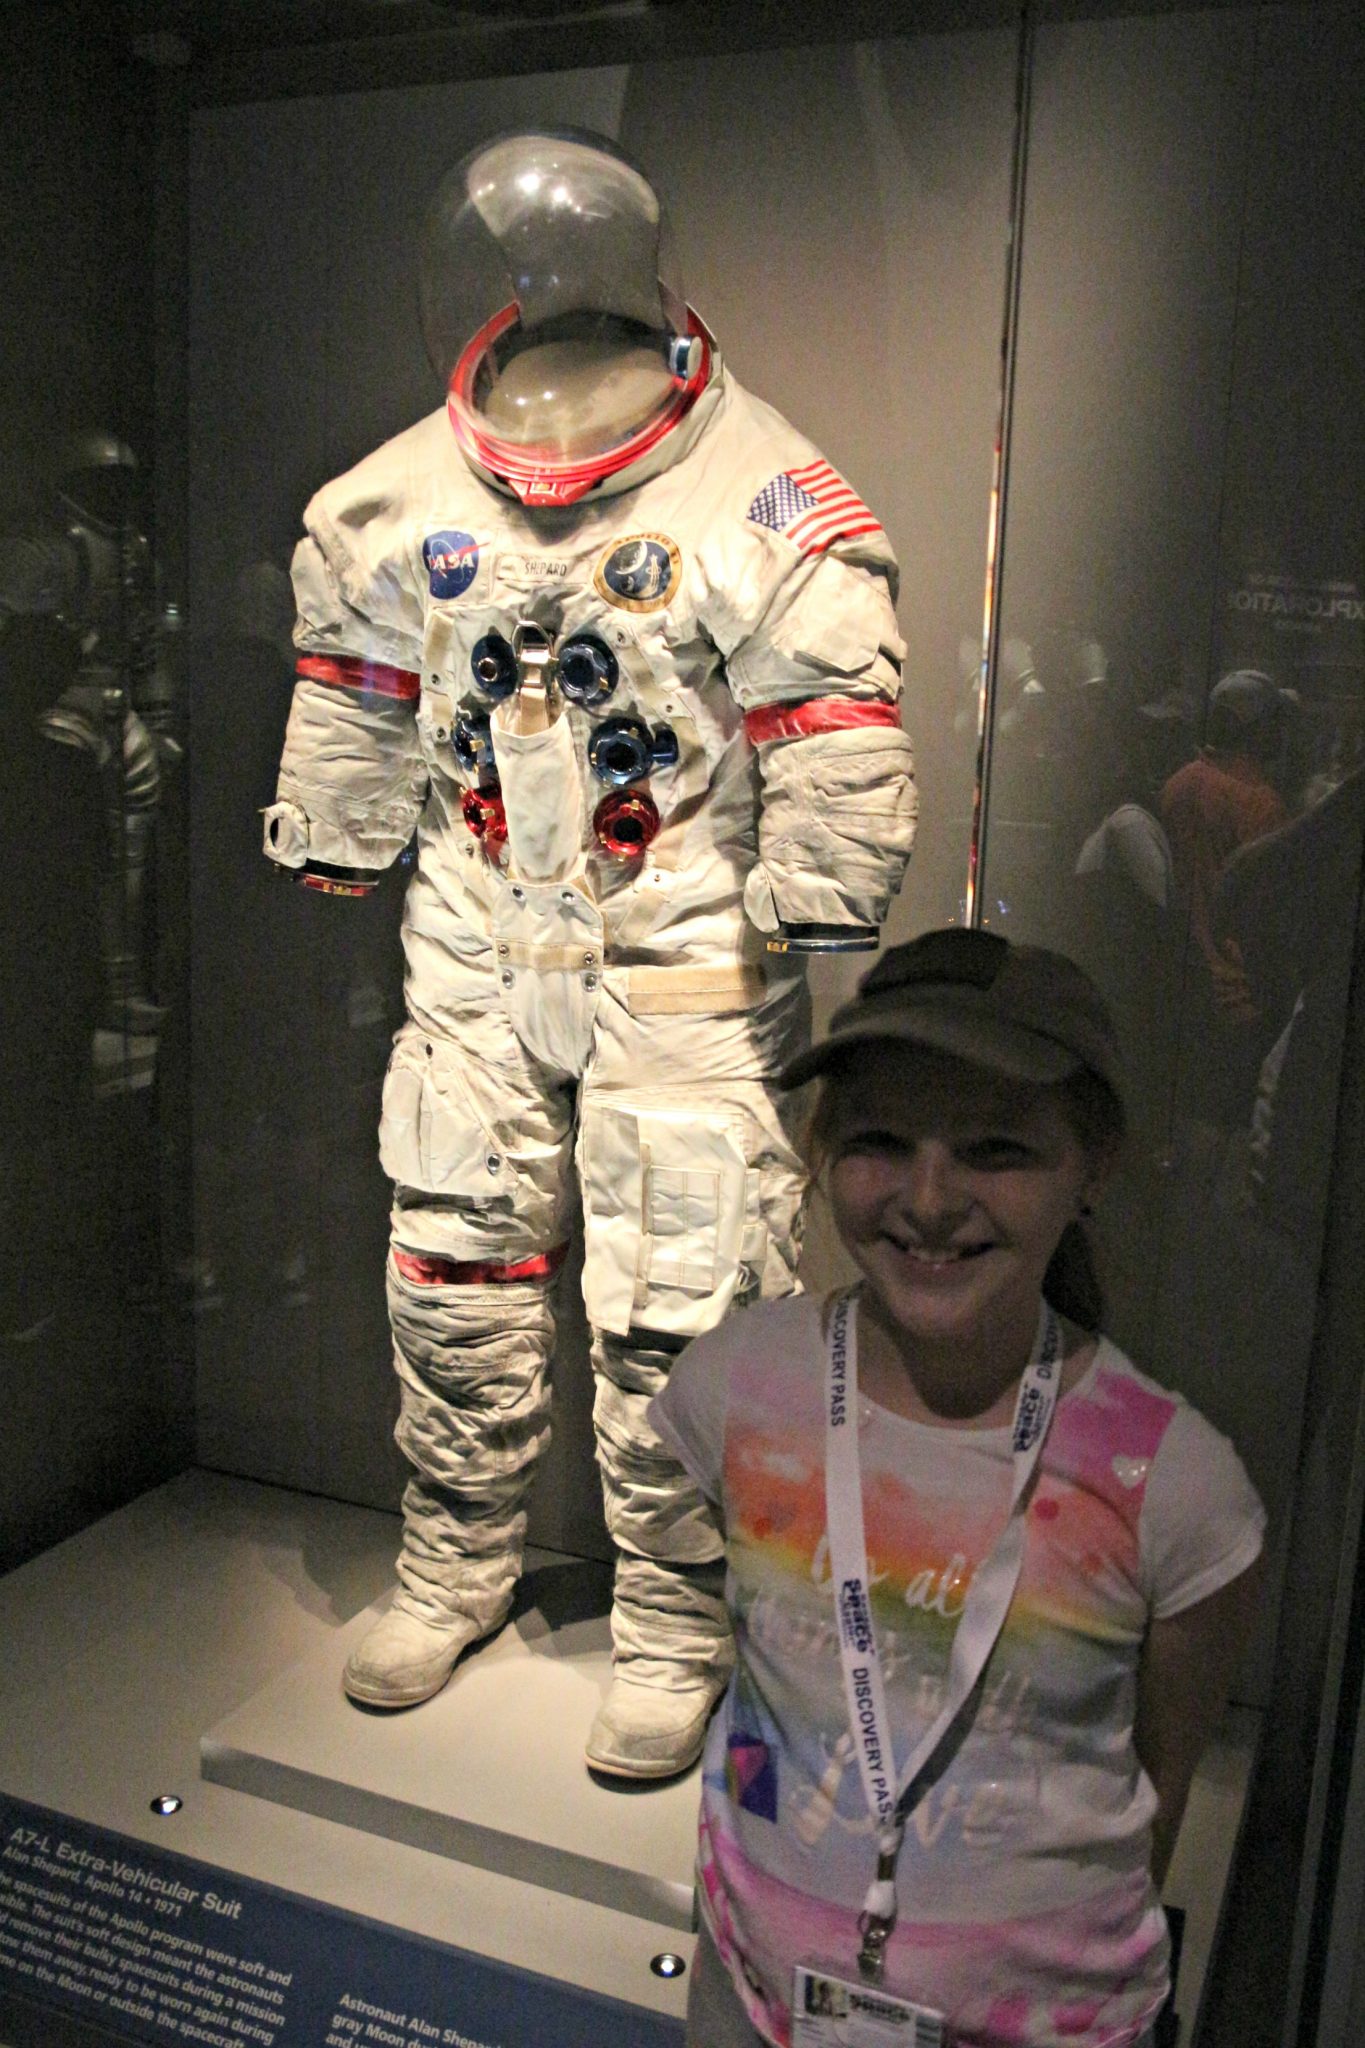 Travel for Mortals: Planning Your Visit to Kennedy Space Center | Mommy Runs It